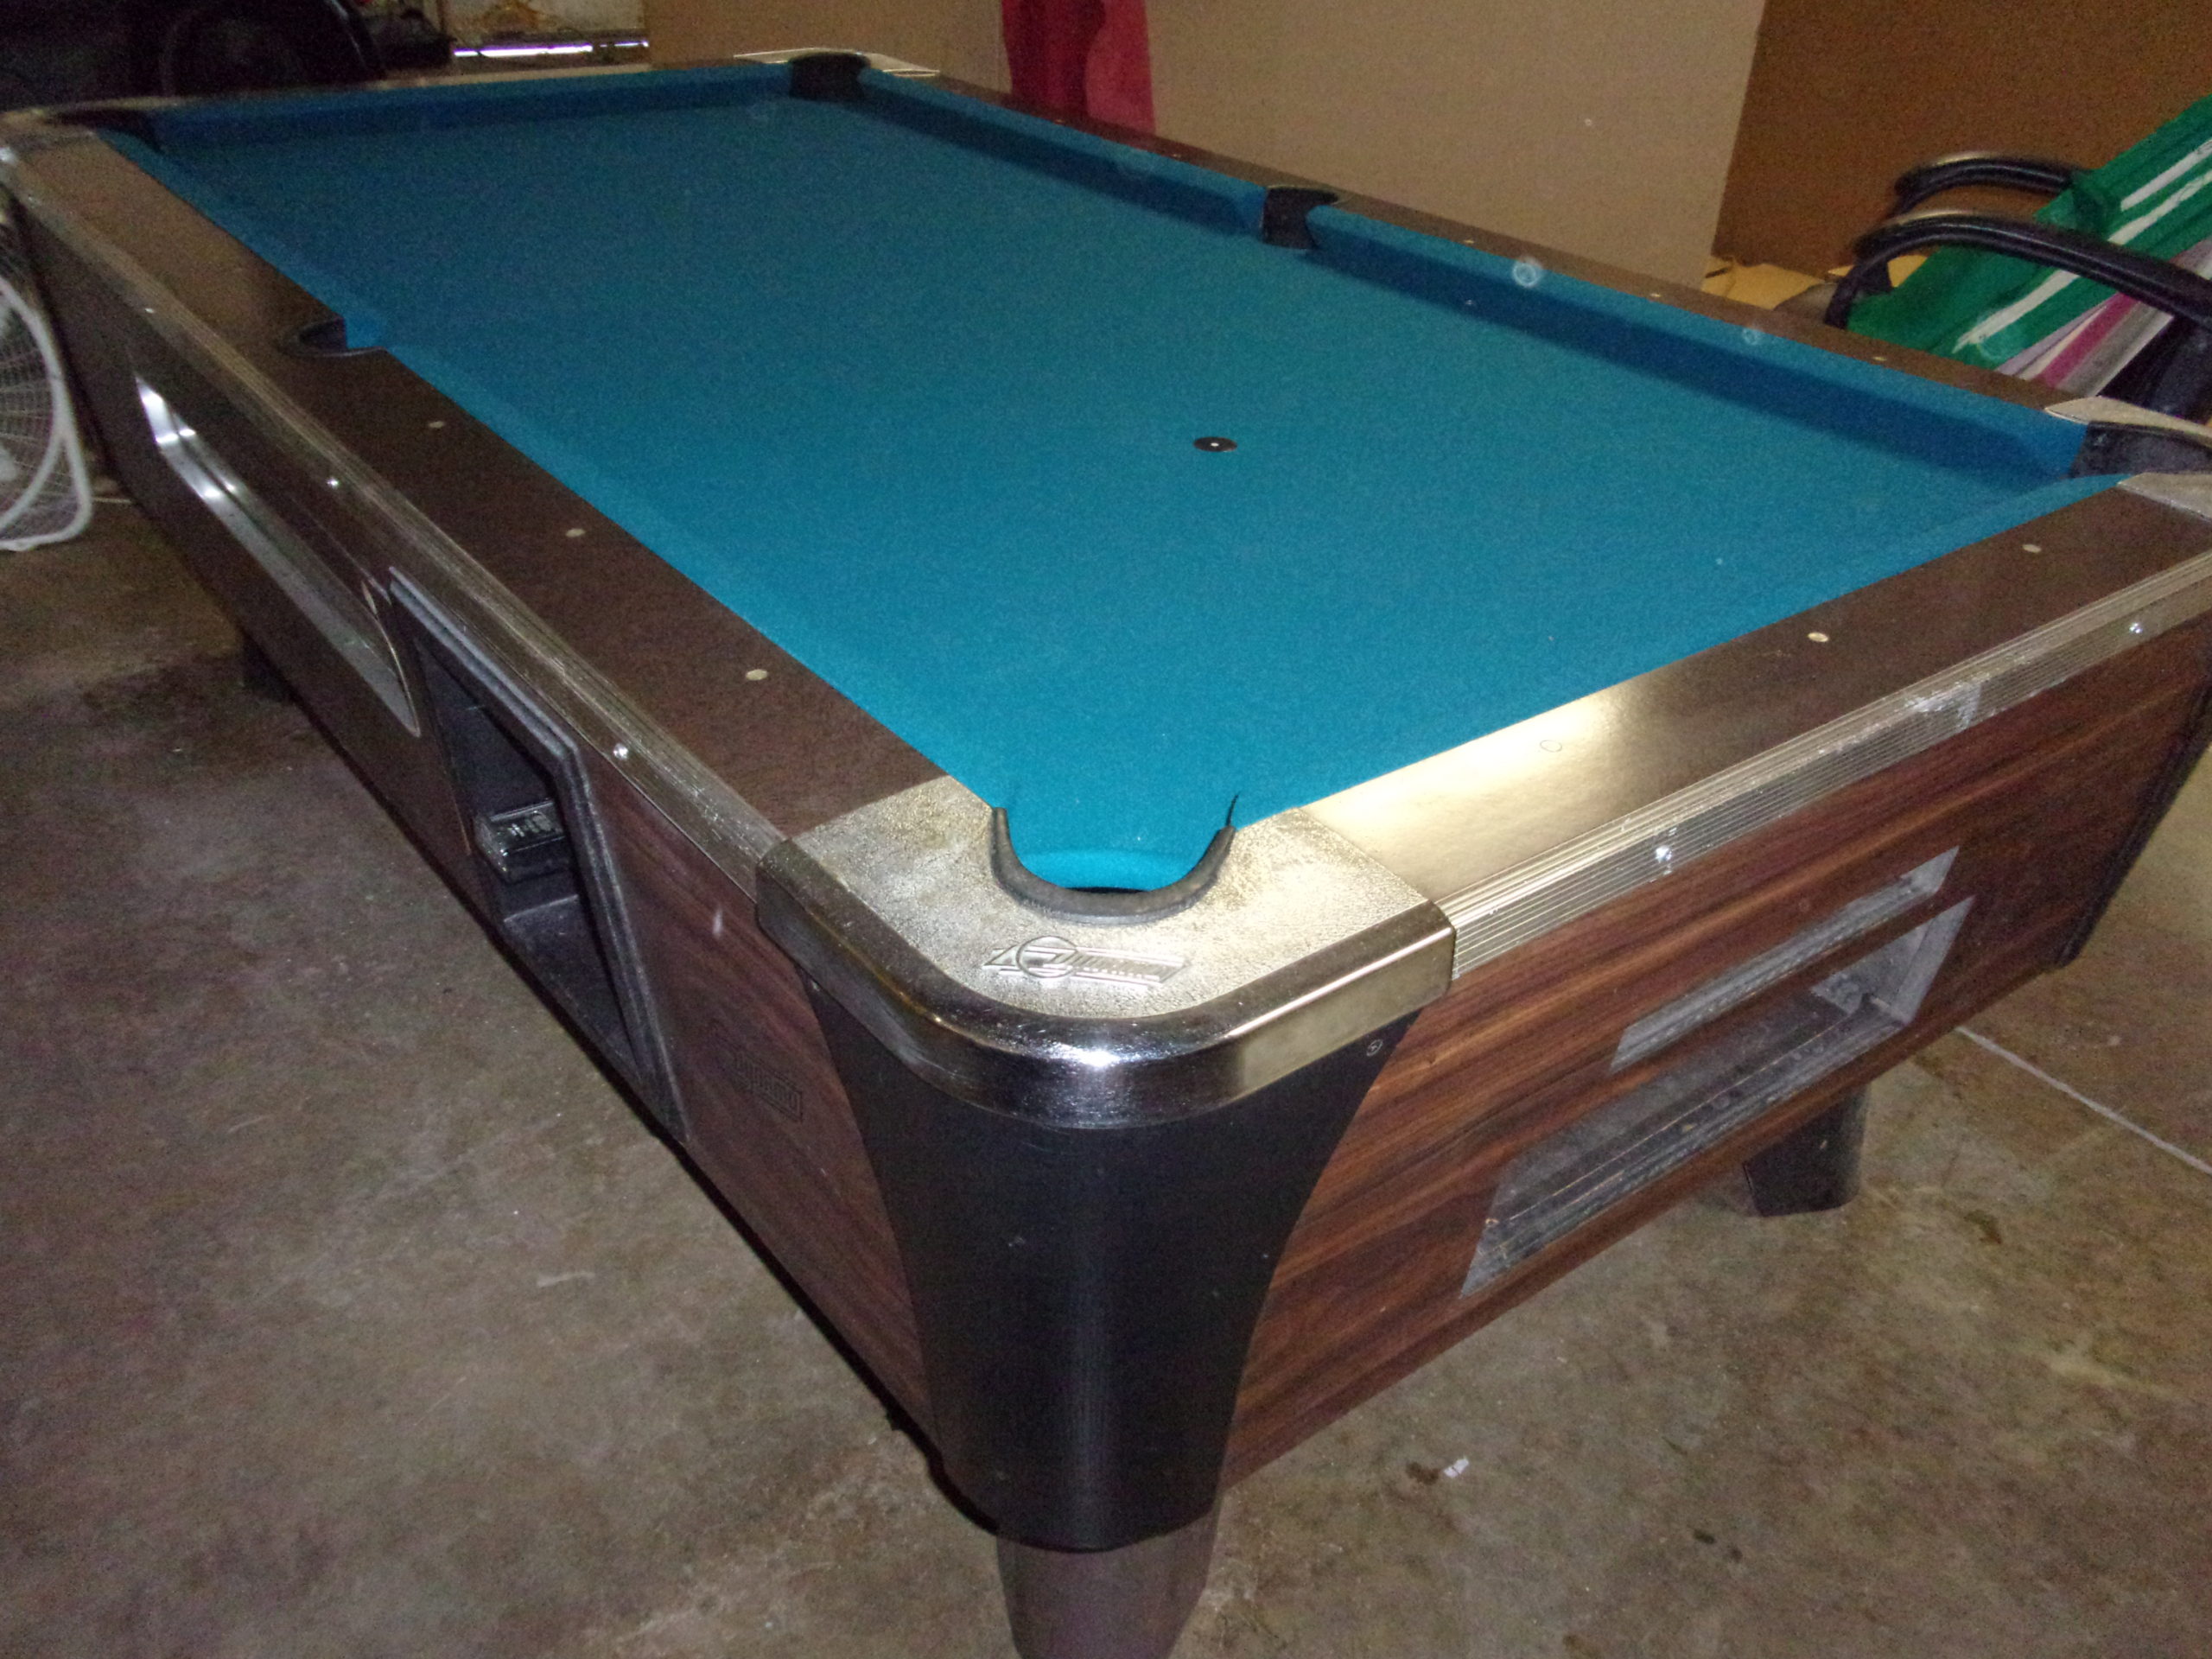 7ft valley pool table dimensions